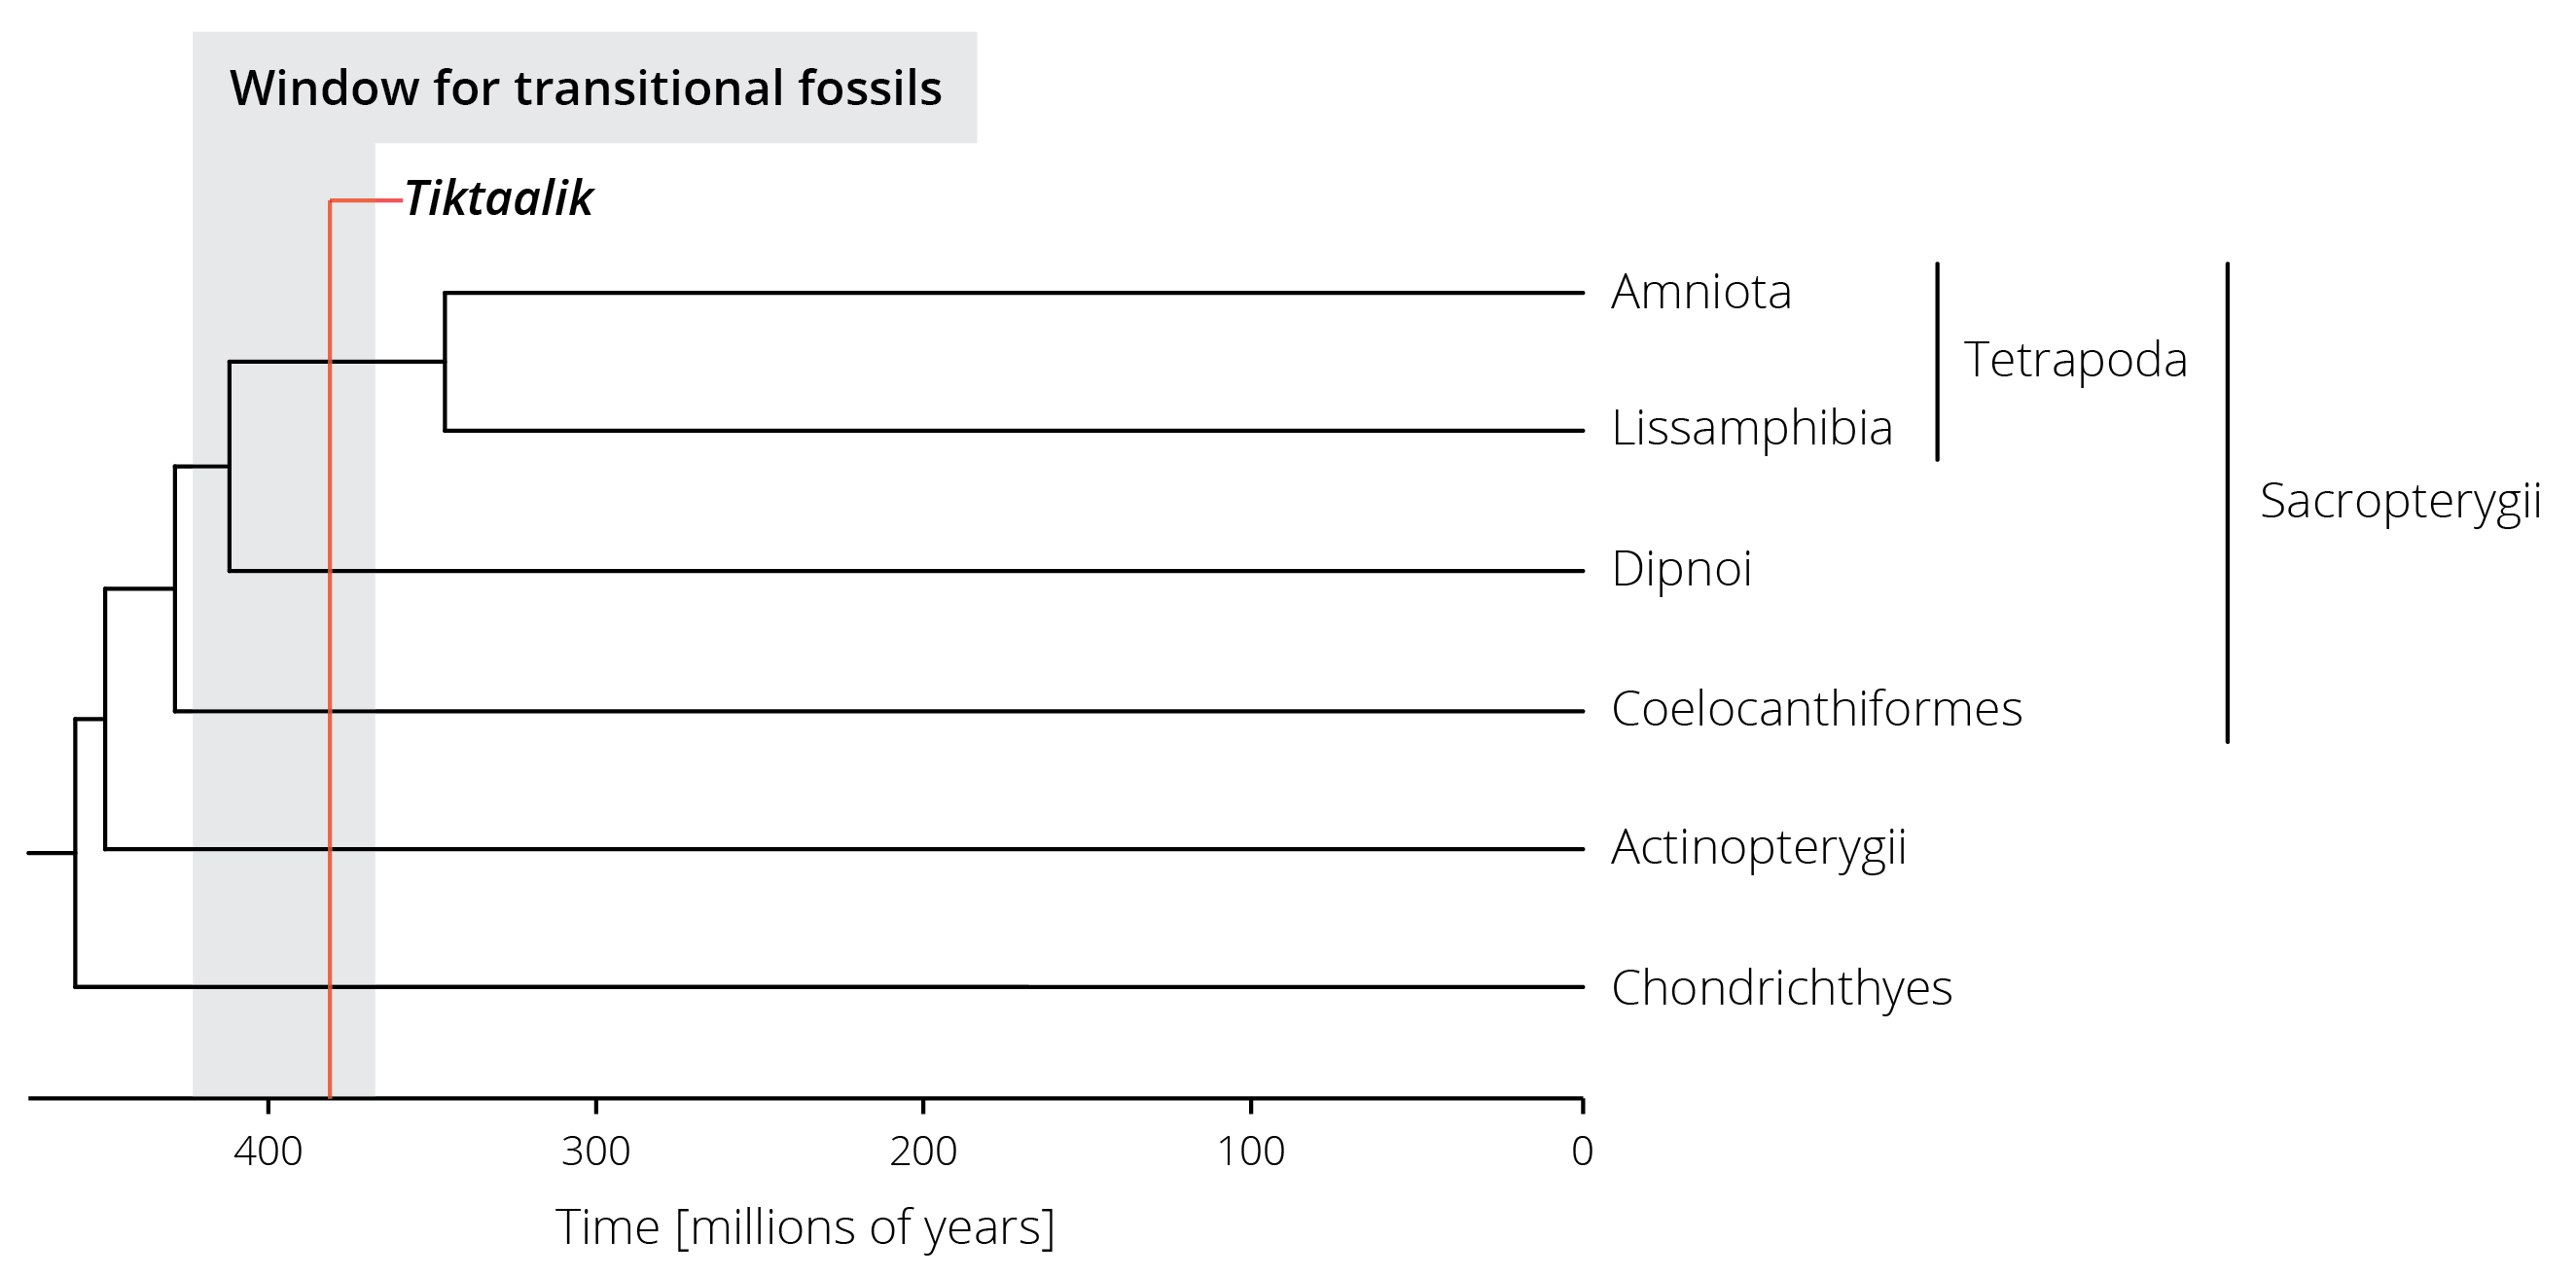 A simplified phylogenetic tree of vertebrates. Terrestrial vertebrates (Tetrapoda) are part of the lobed-finned fishes (Sacropterygii) and split from their sister group (the lungfishes, Dipnoi) between 350 and 425 million years ago. The estimated range for potential transitional fossils is highlighted in gray, the age of the *Tiktaalik* fossil in red. 